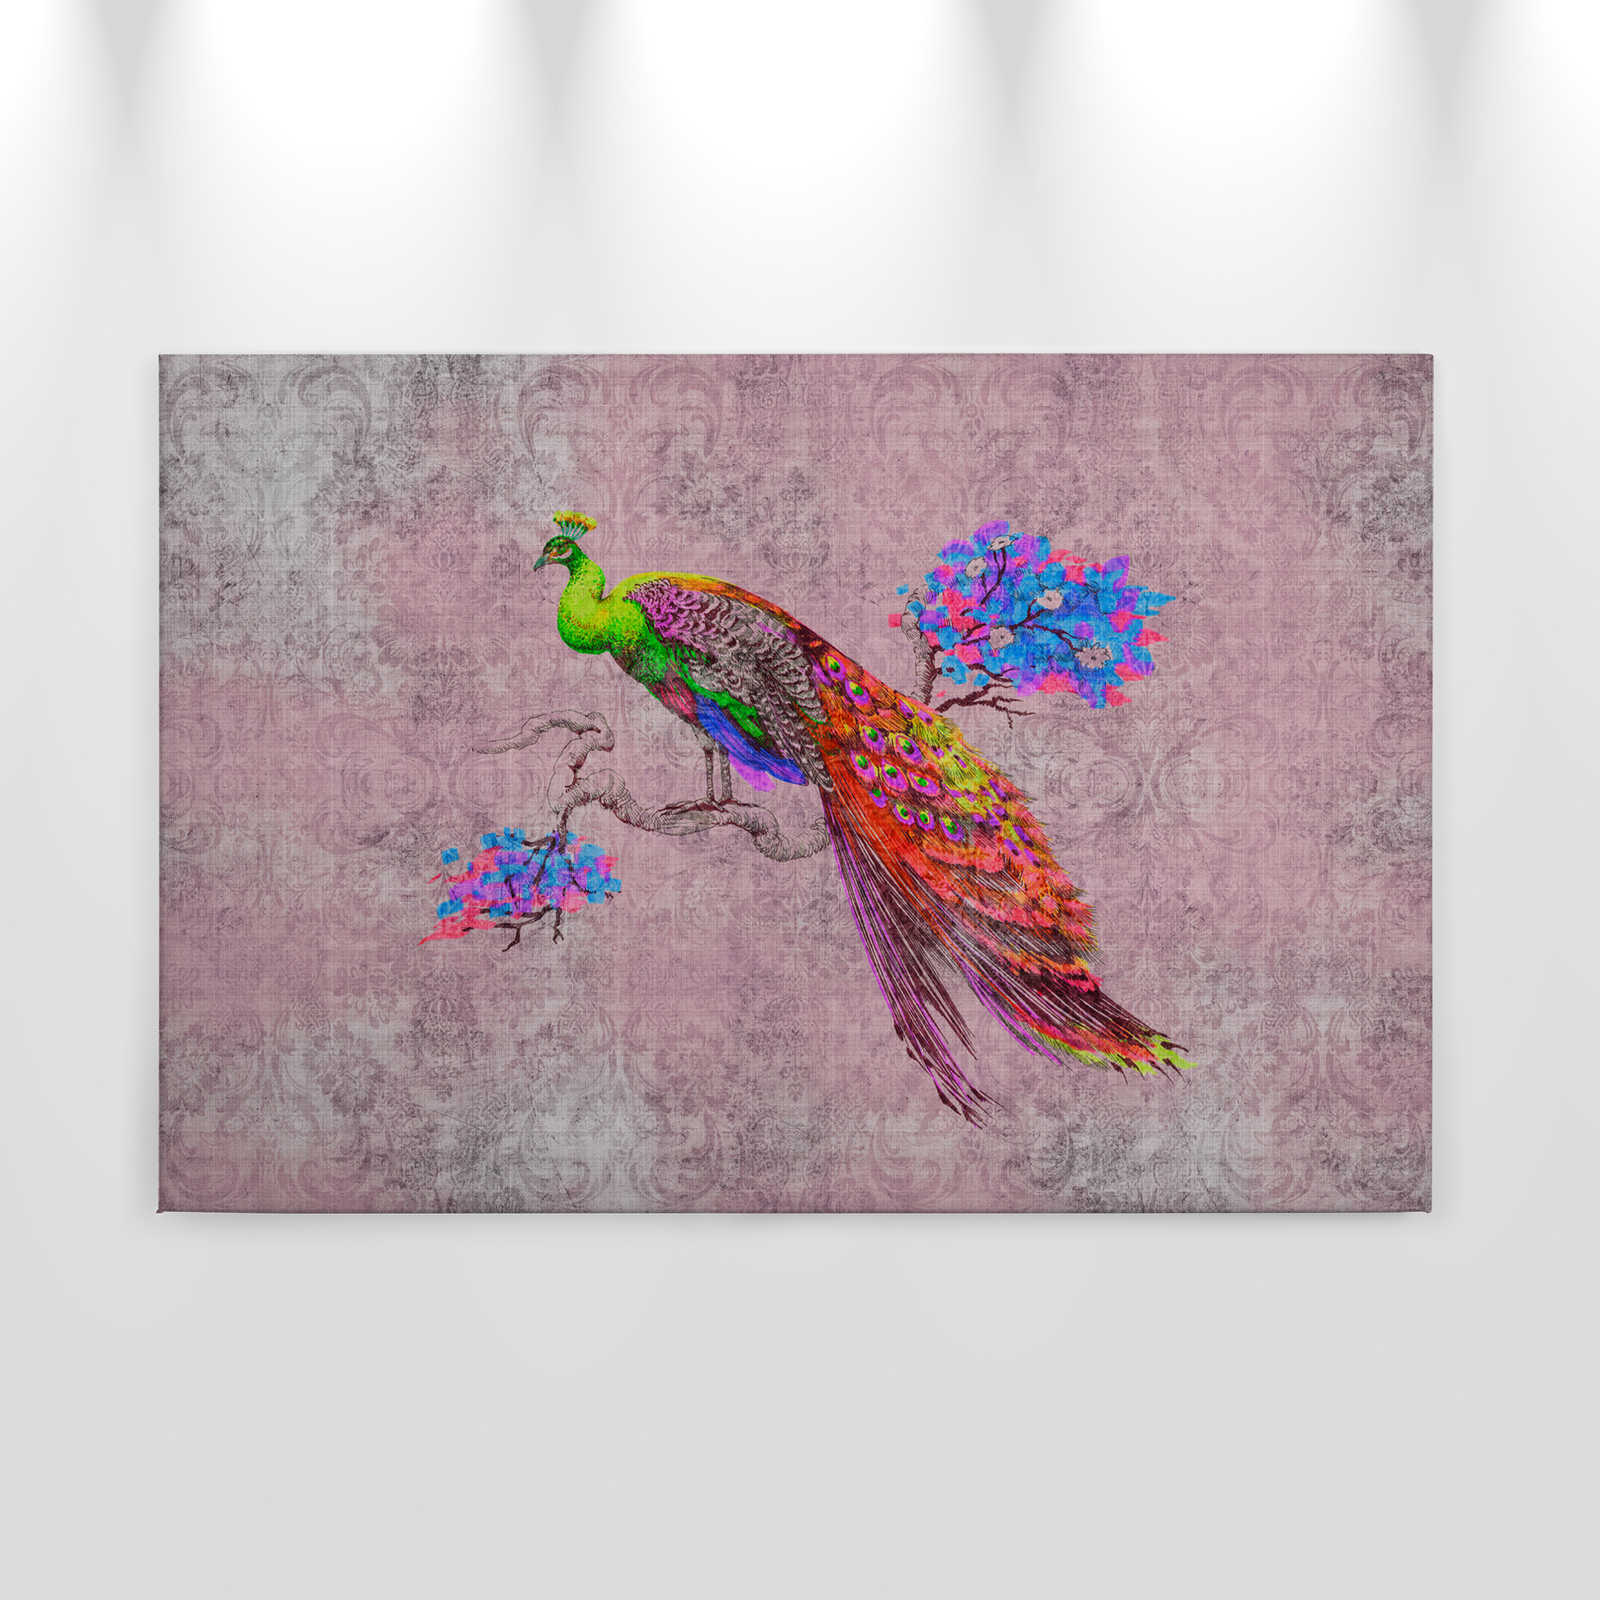             Peacock 2 - Canvas painting with peacock motif & ornament pattern in natural linen structure - 0.90 m x 0.60 m
        